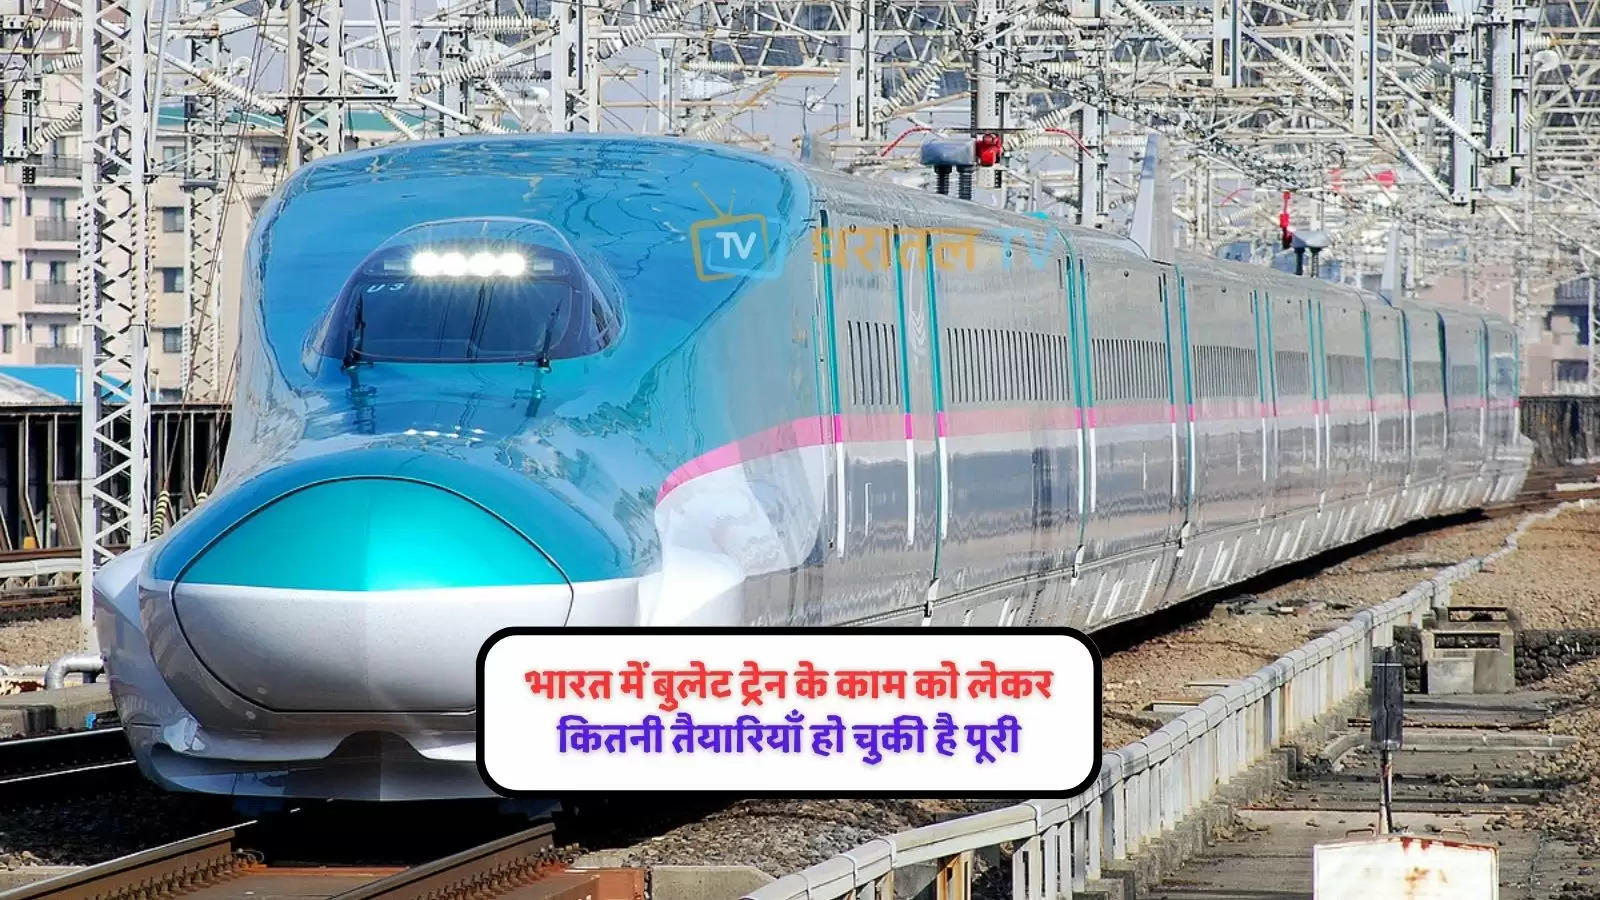 story-bullet-train-mumbai-ahamadabad-bullet-train-at-which-station-will-the-bullet-train-stop-how-much-has-been-covered